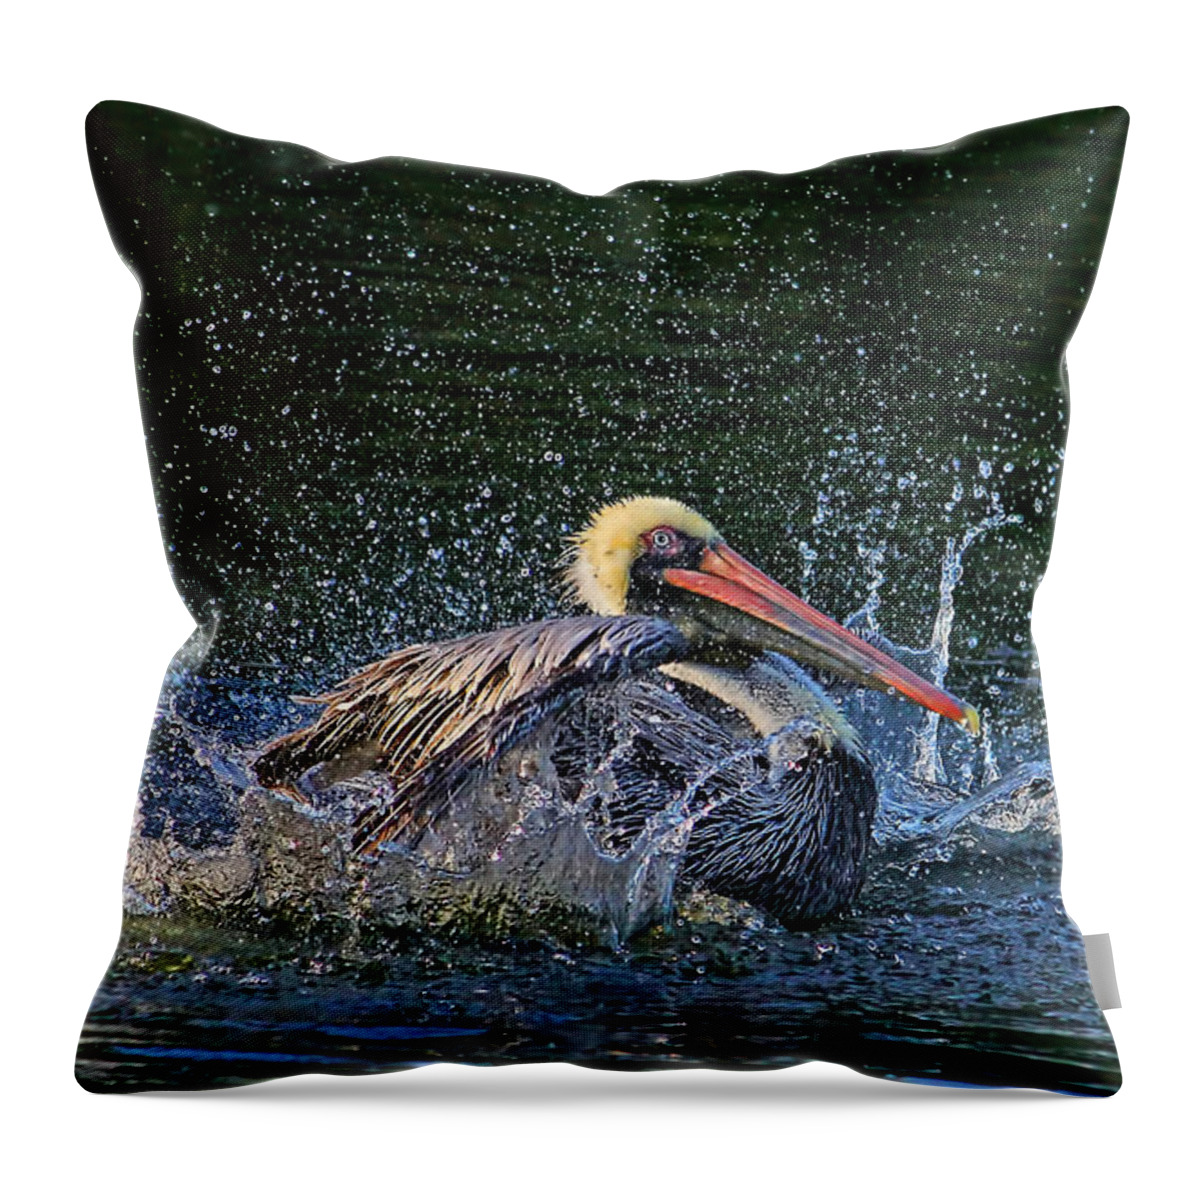 Pelican Throw Pillow featuring the photograph Splish Splash by HH Photography of Florida